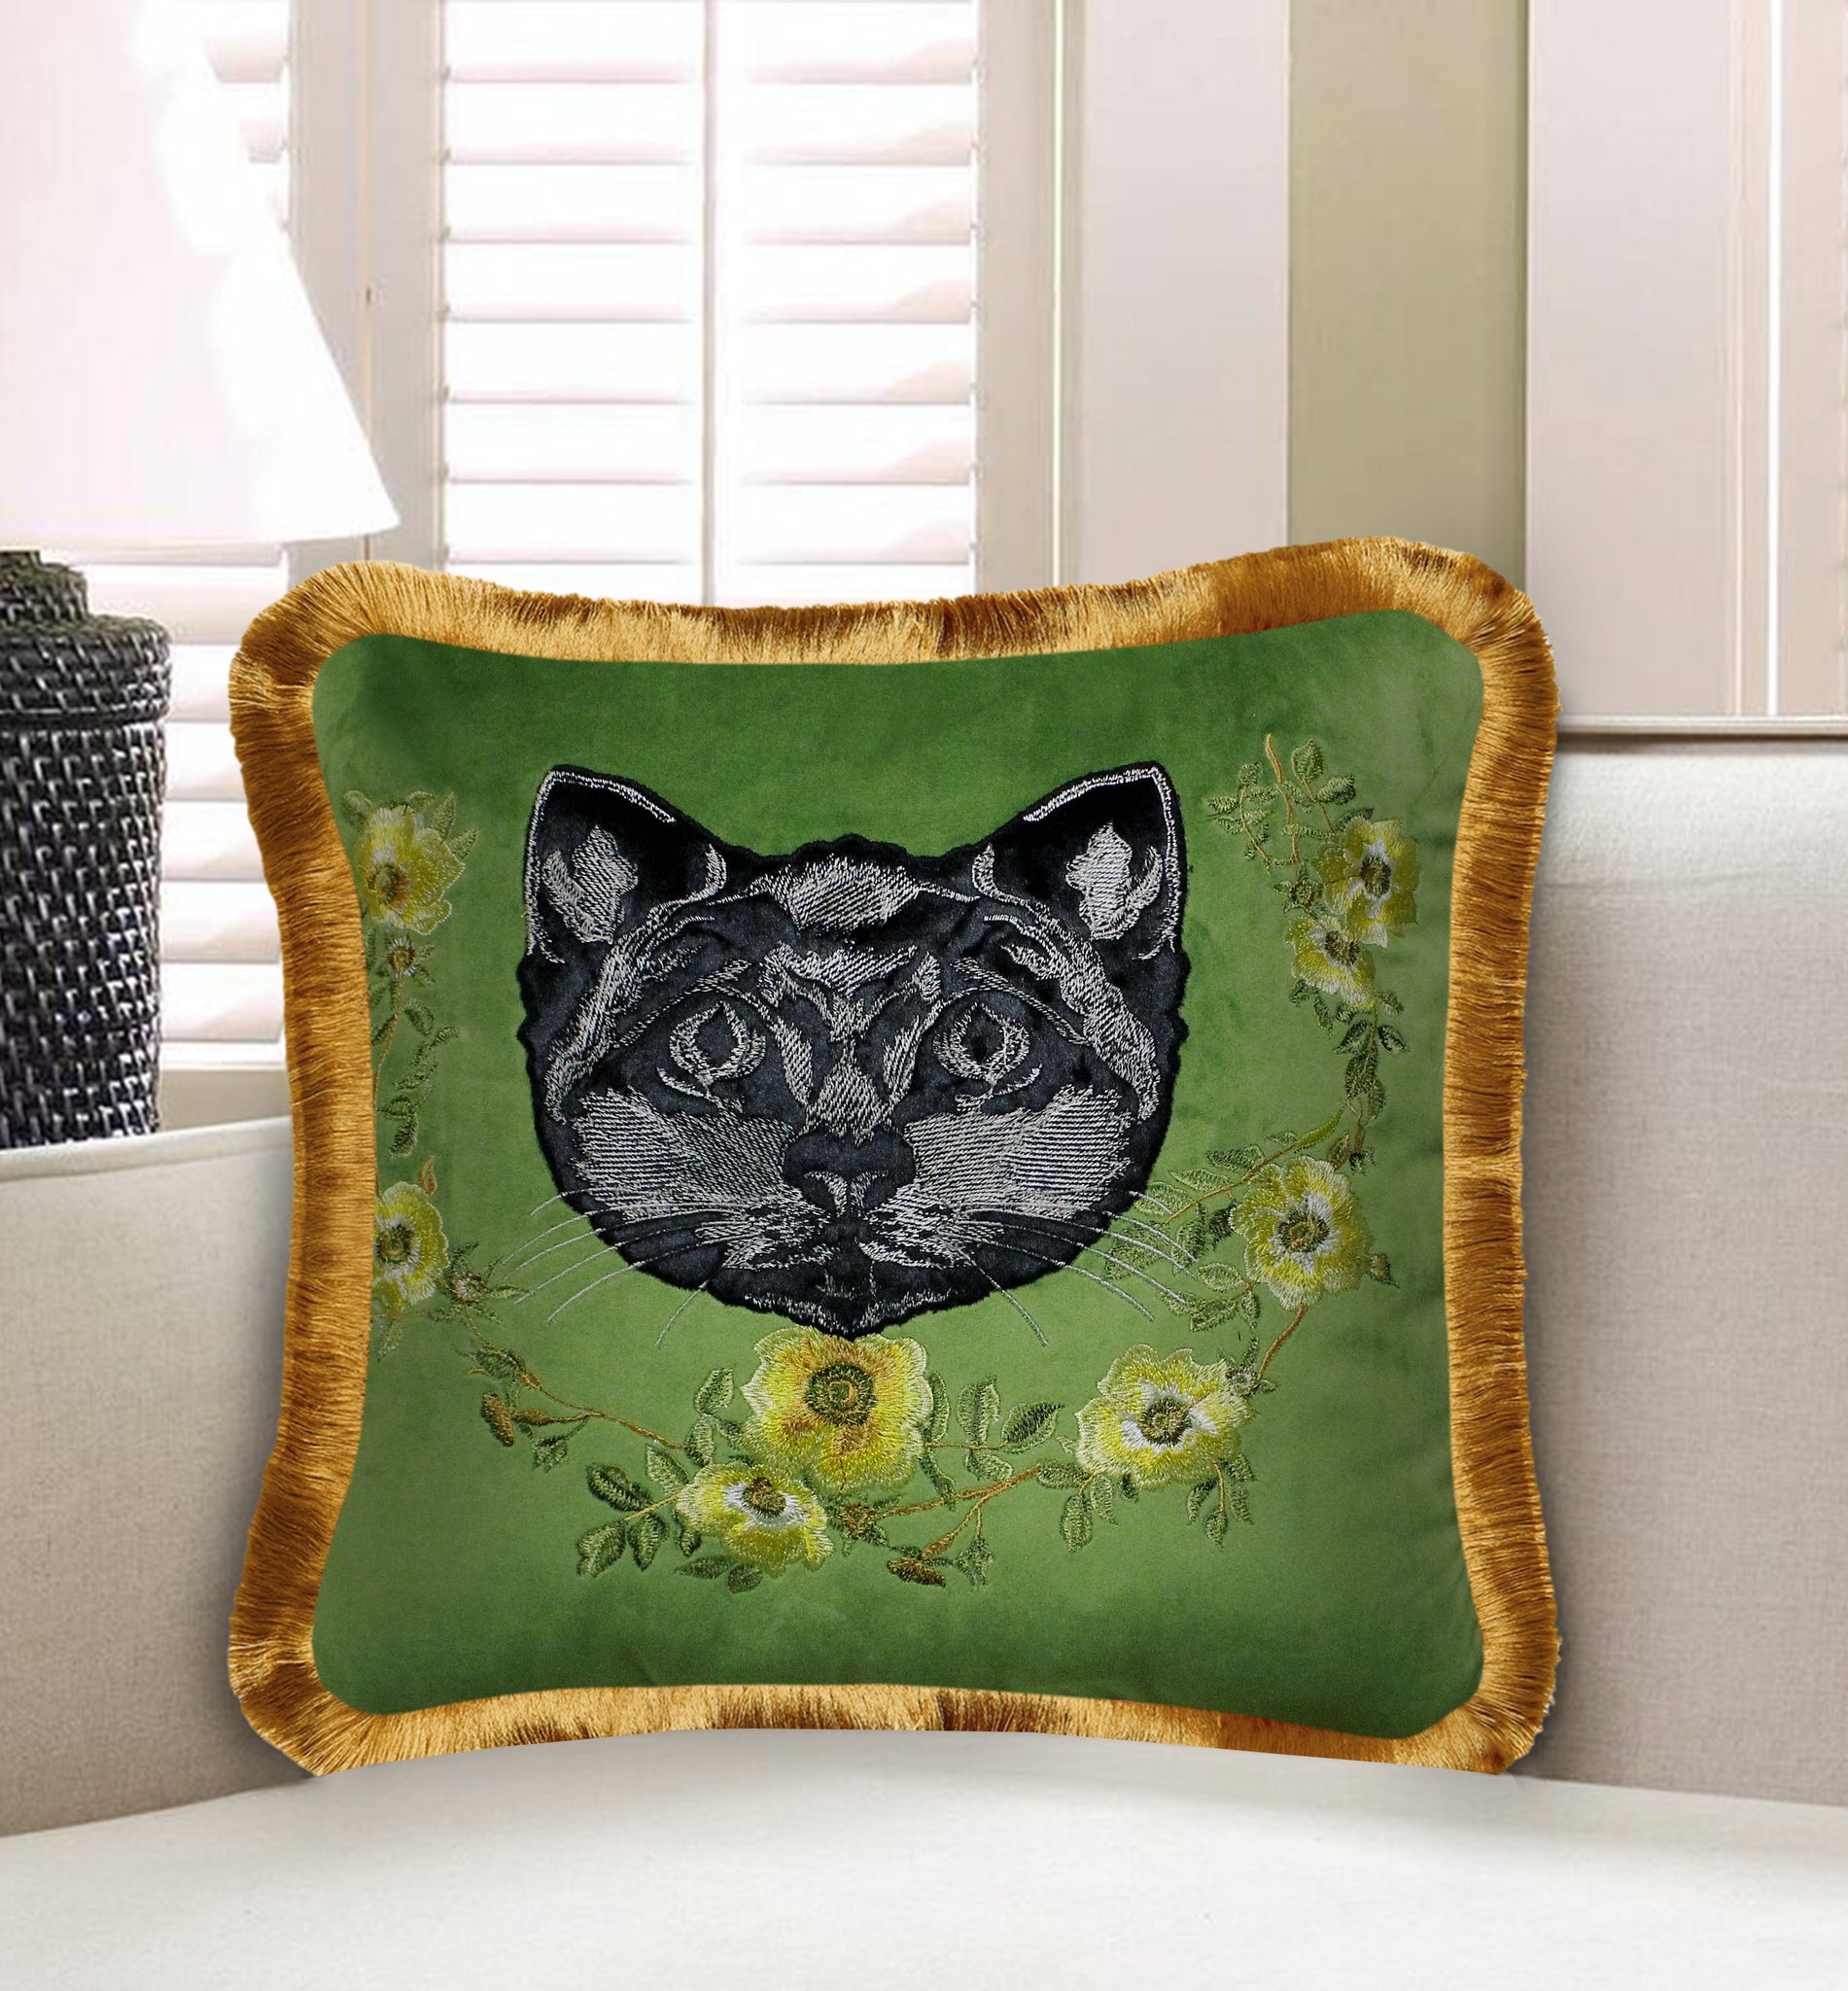 Velvet Cushion Cover Cute Cat Applique Embroidery Decorative Pillow Modern Home Decor Throw Pillow for Sofa Chair Living Room 45x45 cm 18x18 In